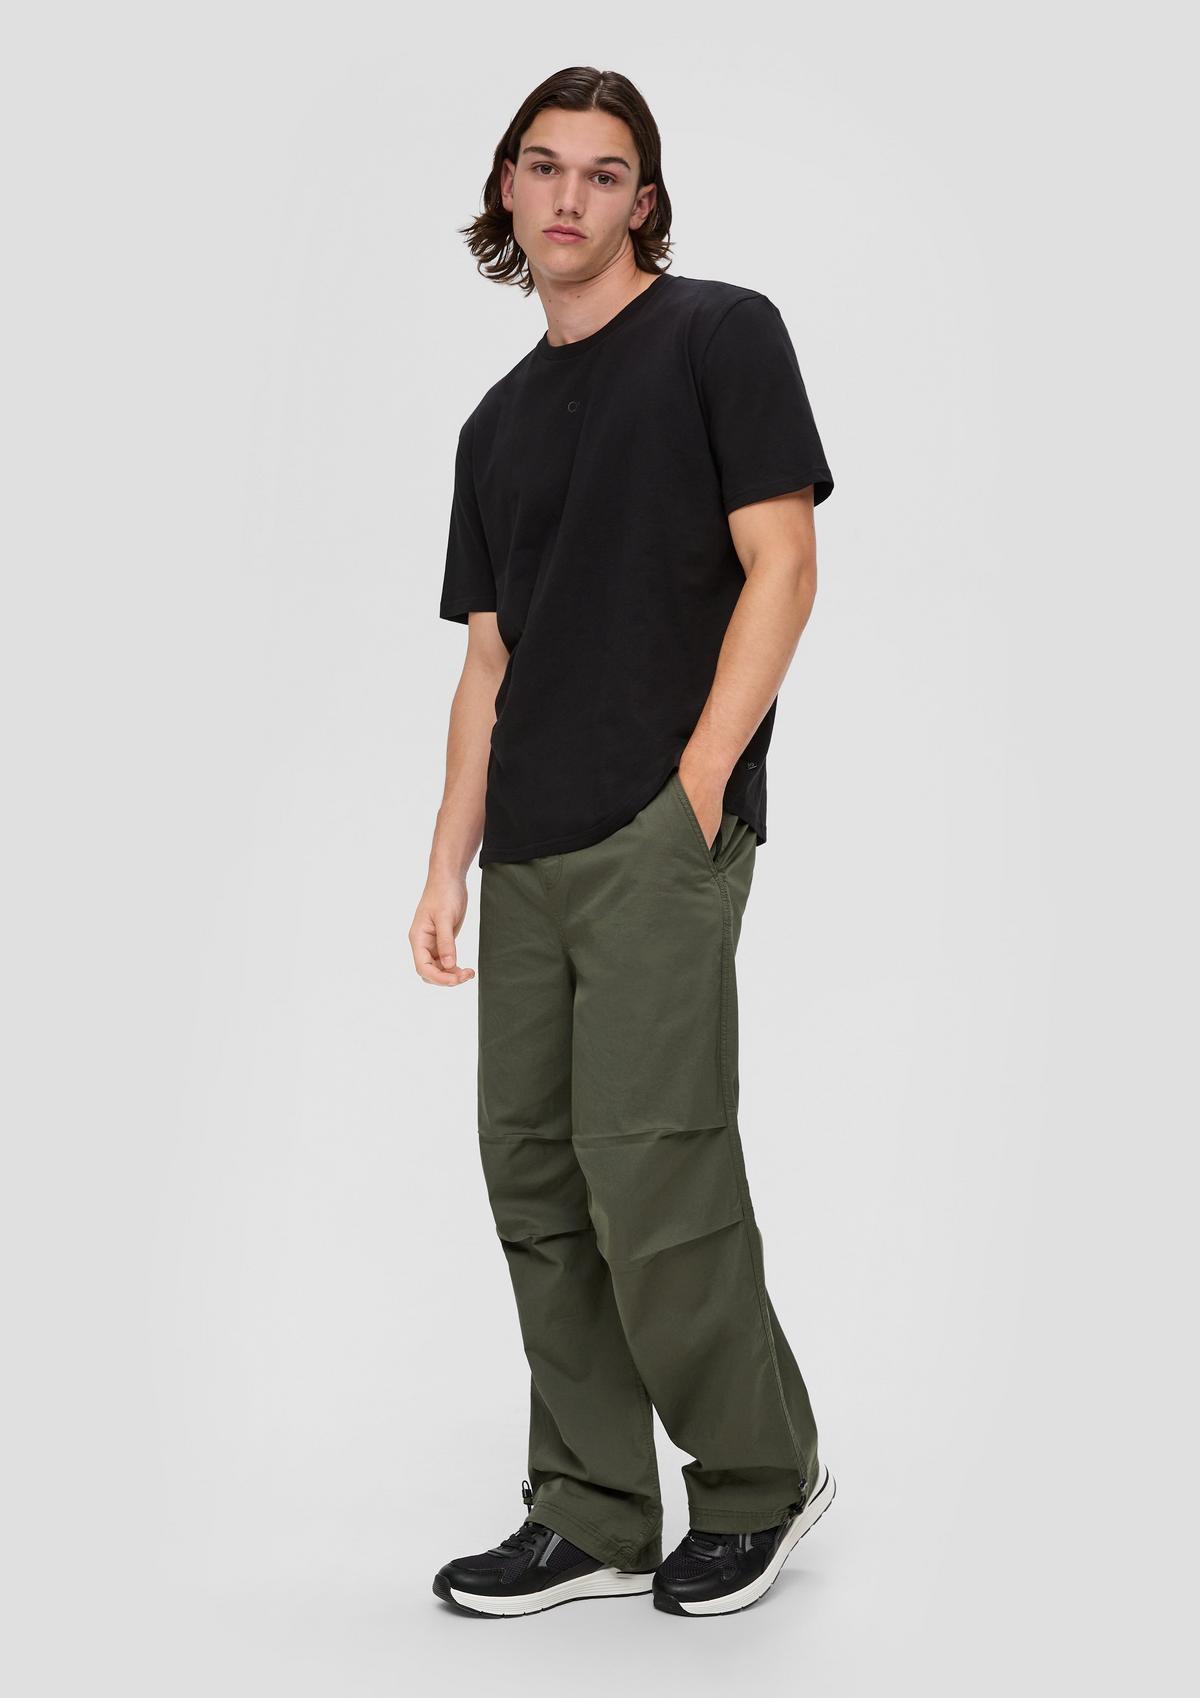 Parachute trousers made of stretch cotton